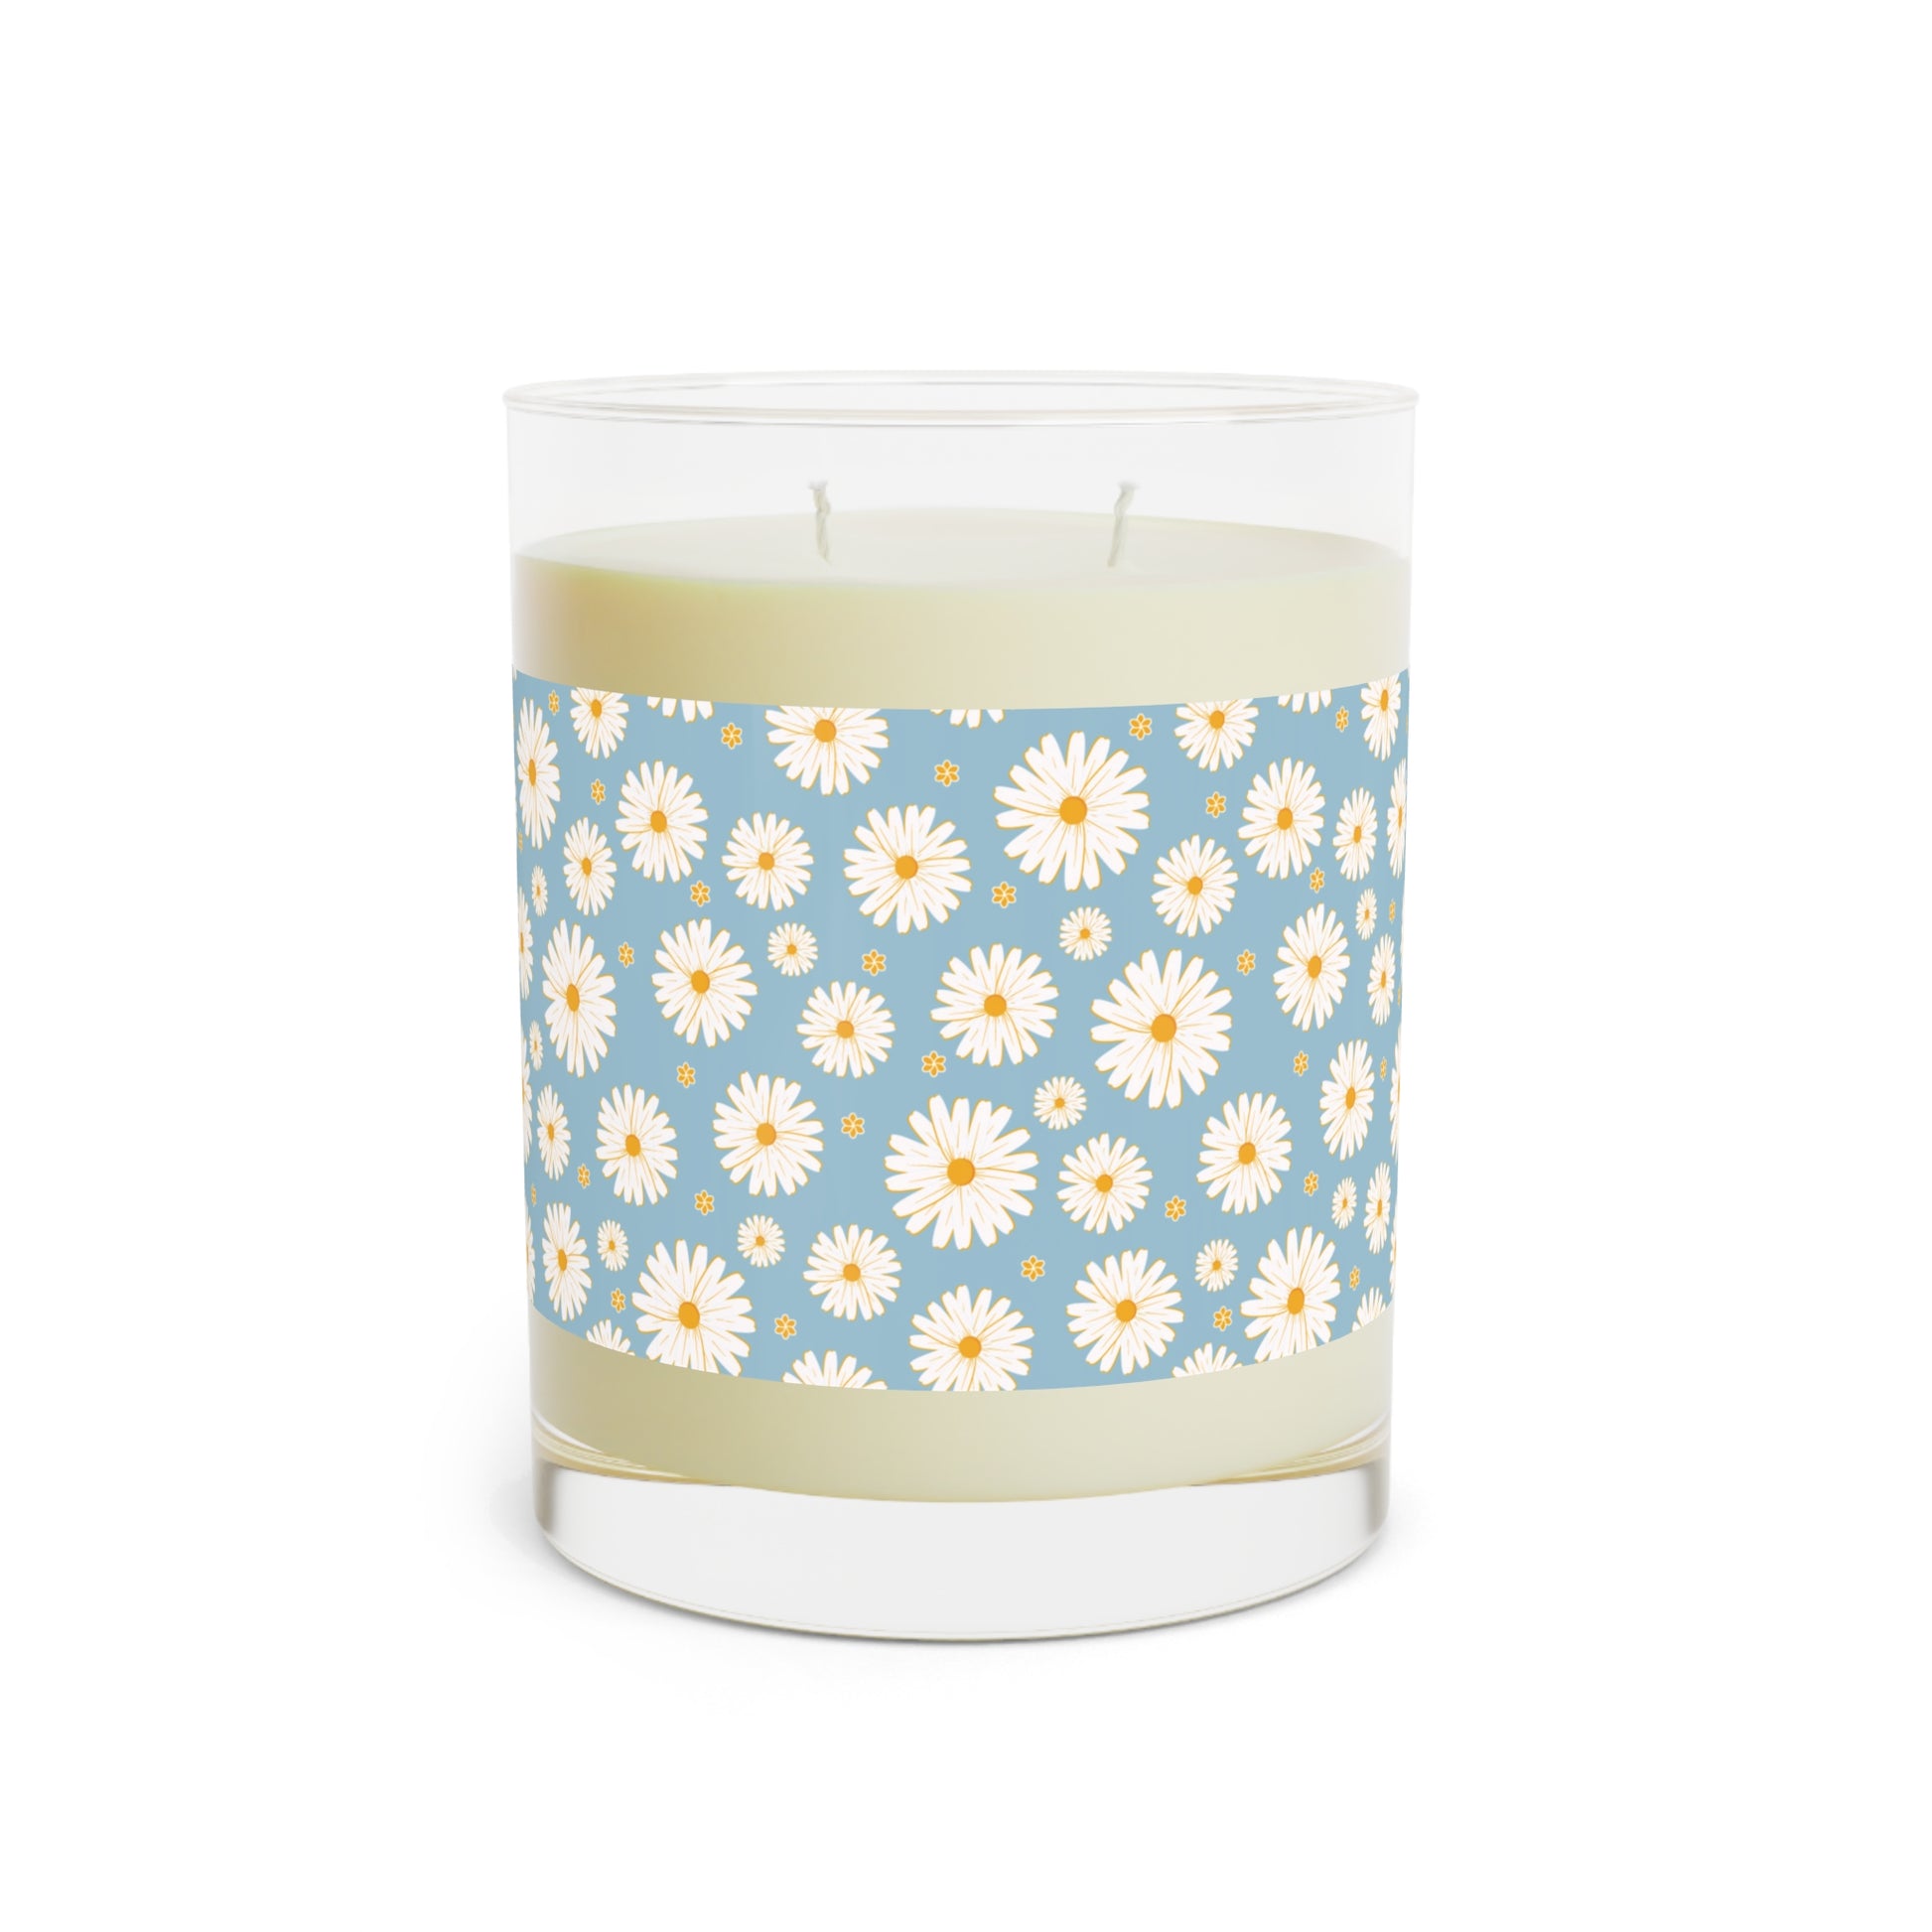 Flower Design Aromatherapy Candle